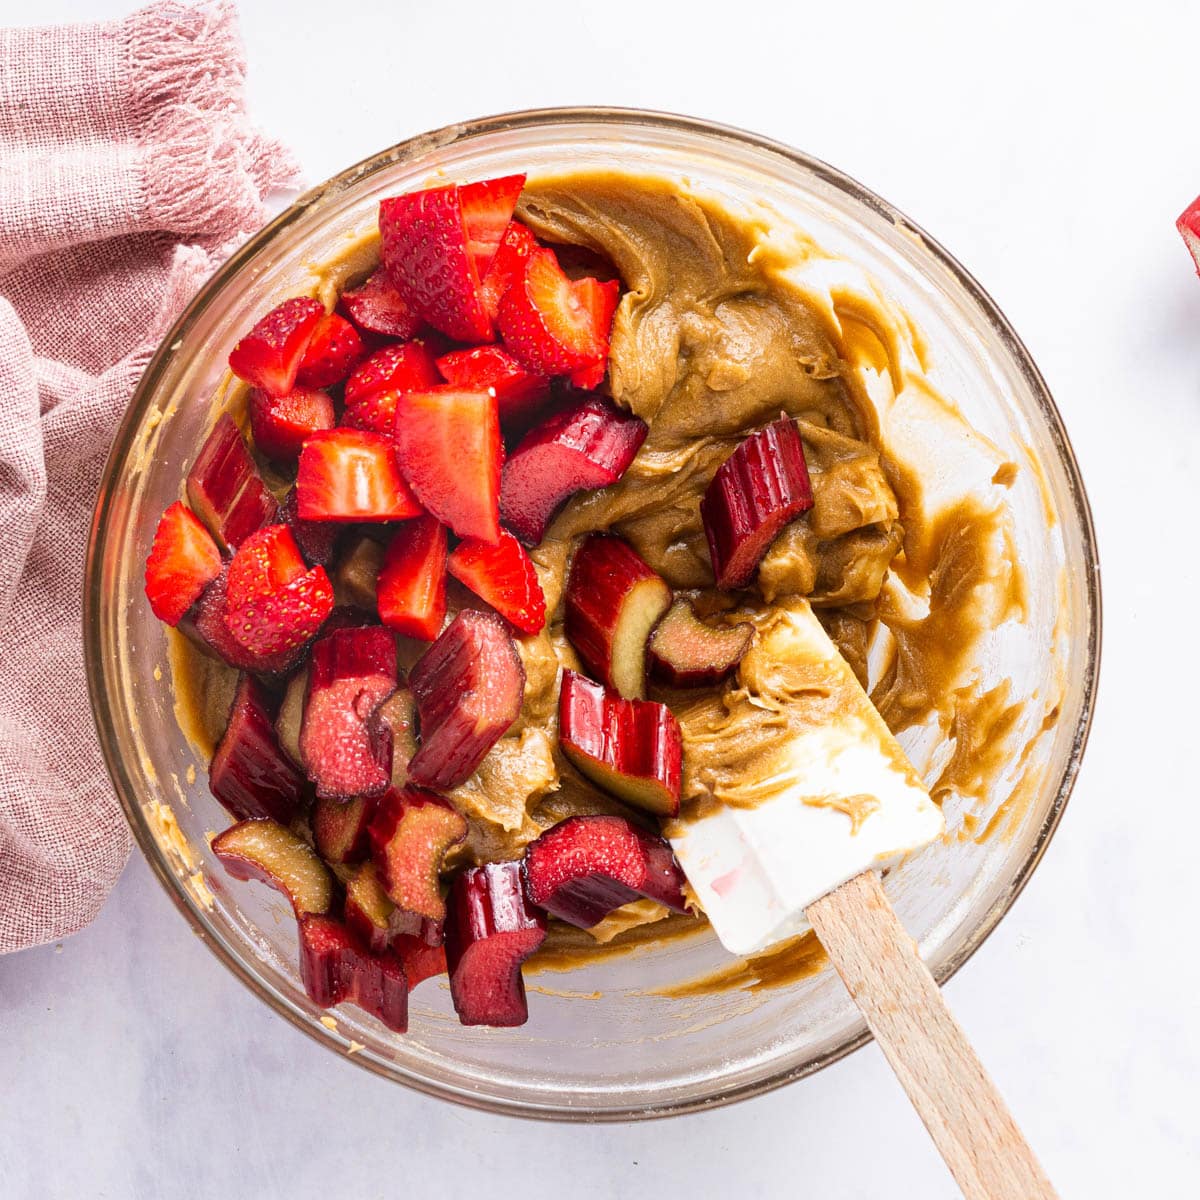 mixing strawberries and rhubarb into cookie dough